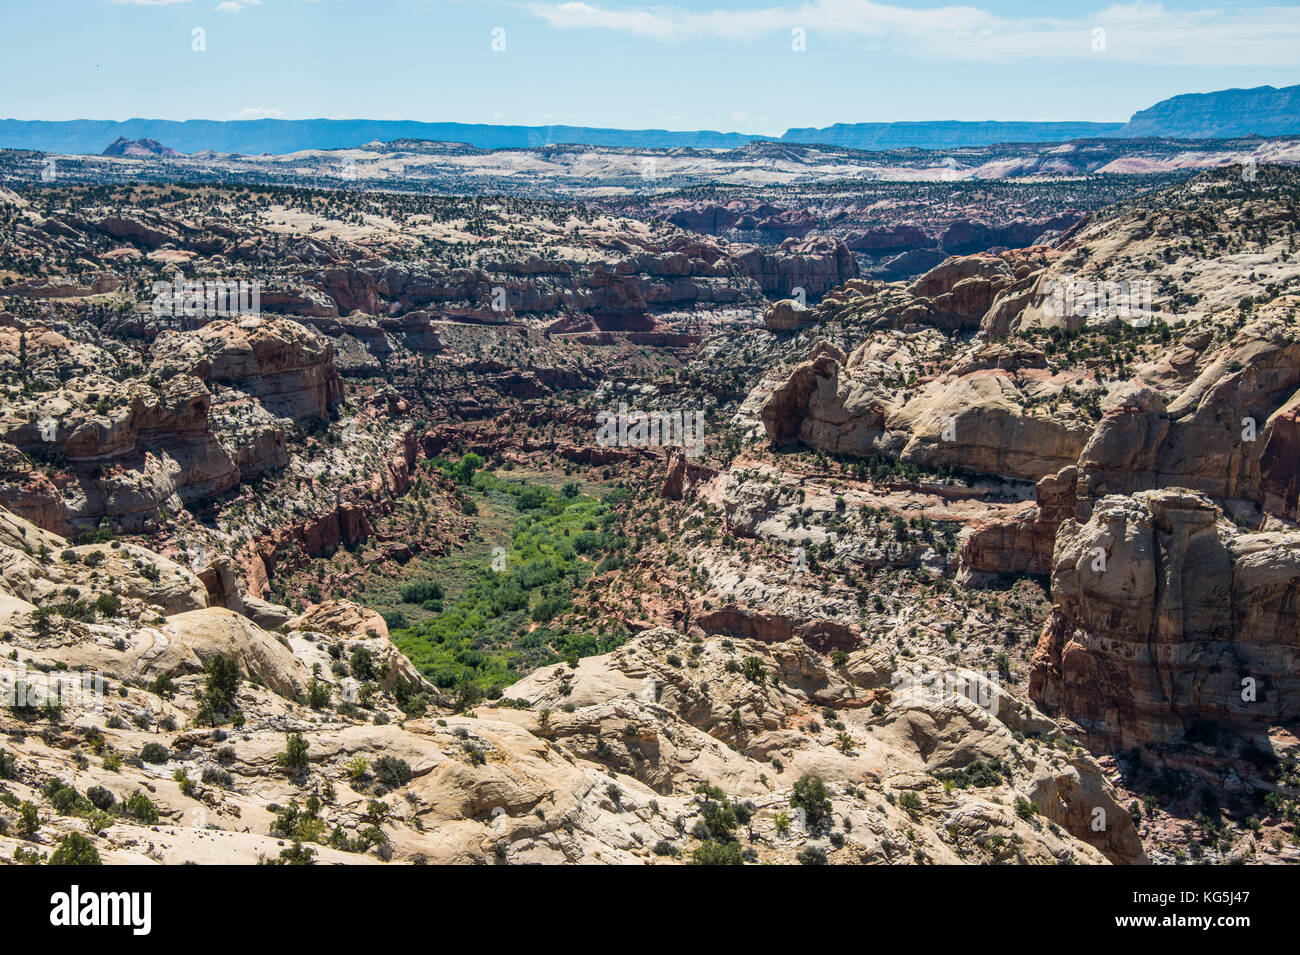 Overlook over the sandstone cliffs of the Grand Staircase Escalante National Monument, Utah, USA Stock Photo